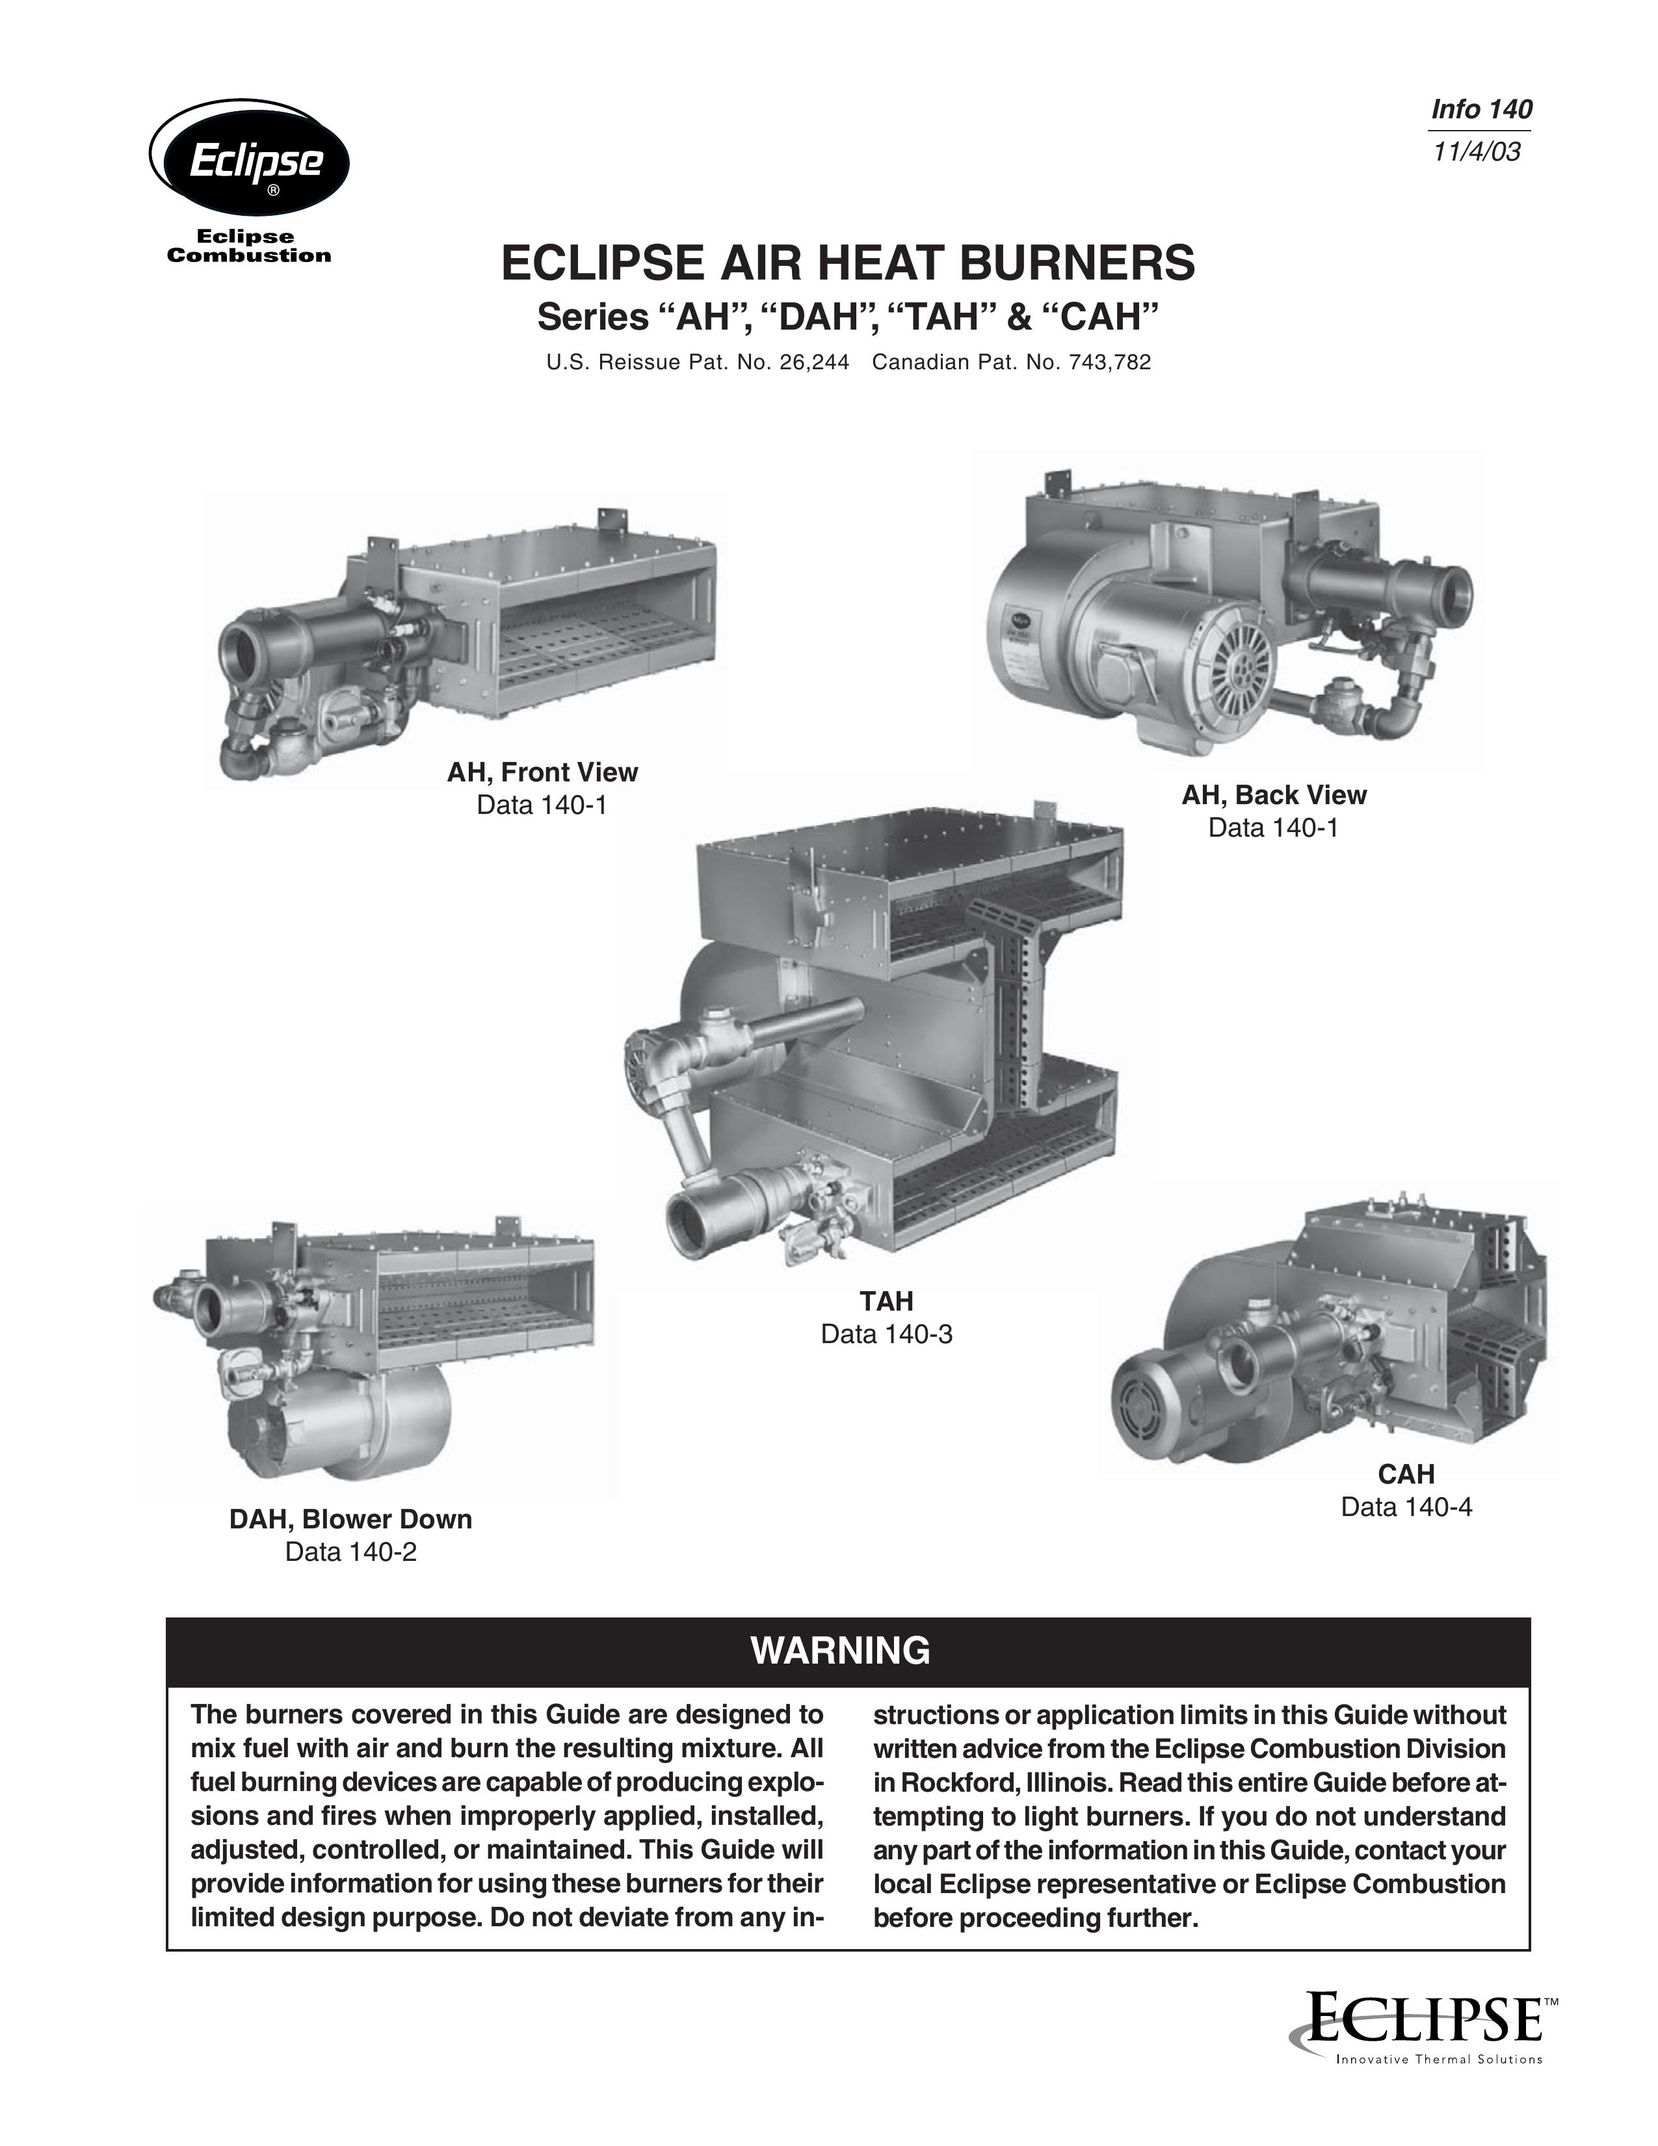 Eclipse Combustion AH Air Conditioner User Manual (Page 1)